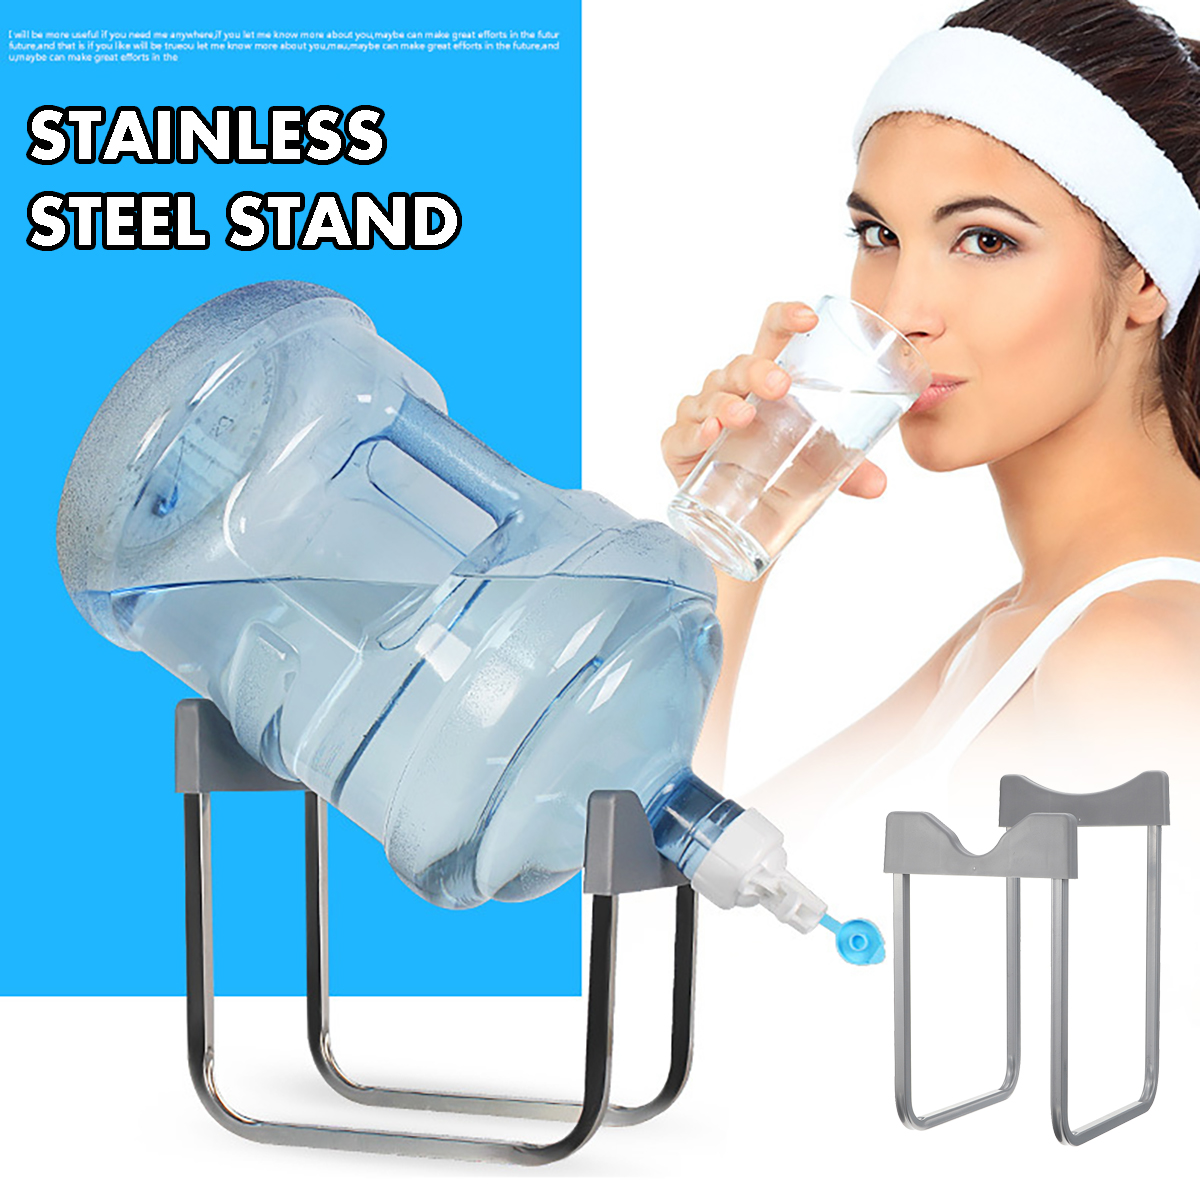 Water-Bottle-Rack-Stainless-Steel-Dispenser-Stand-Holder-With-Valve-Nozzle-And-Stick-1741193